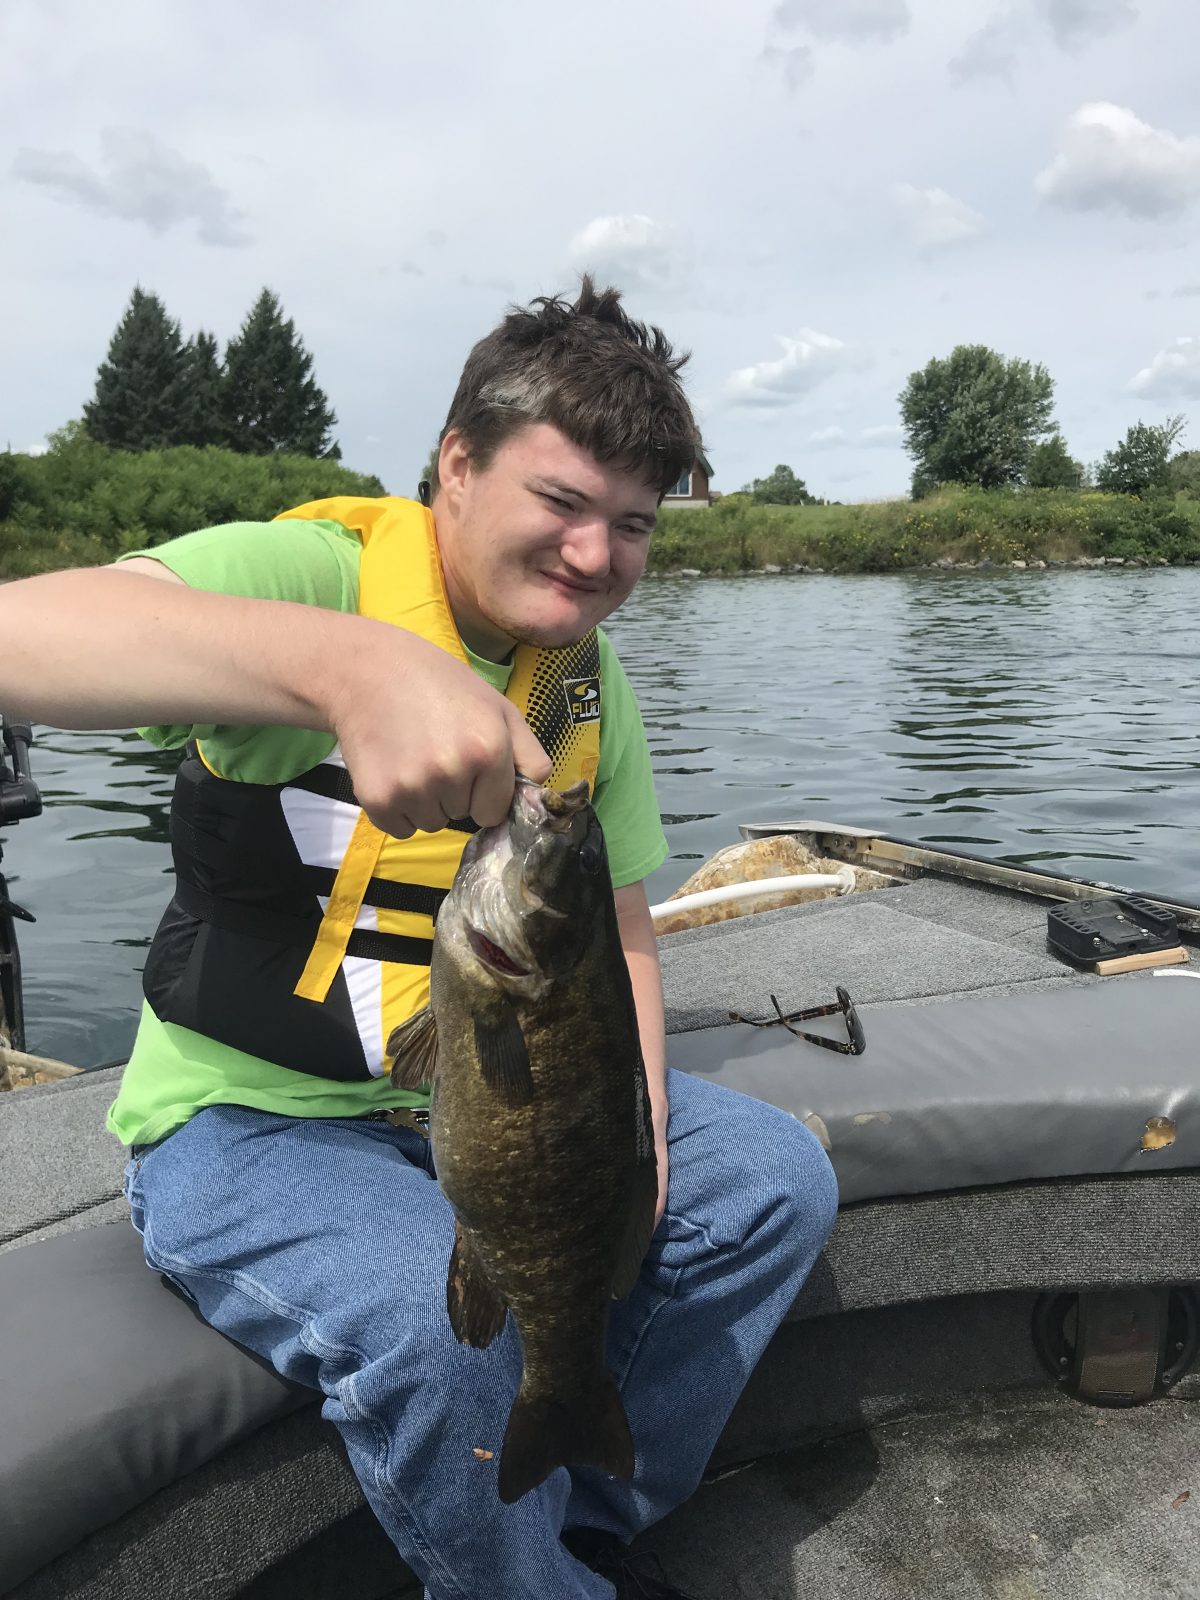 Reel, experiential fun at Fishing for Special Needs